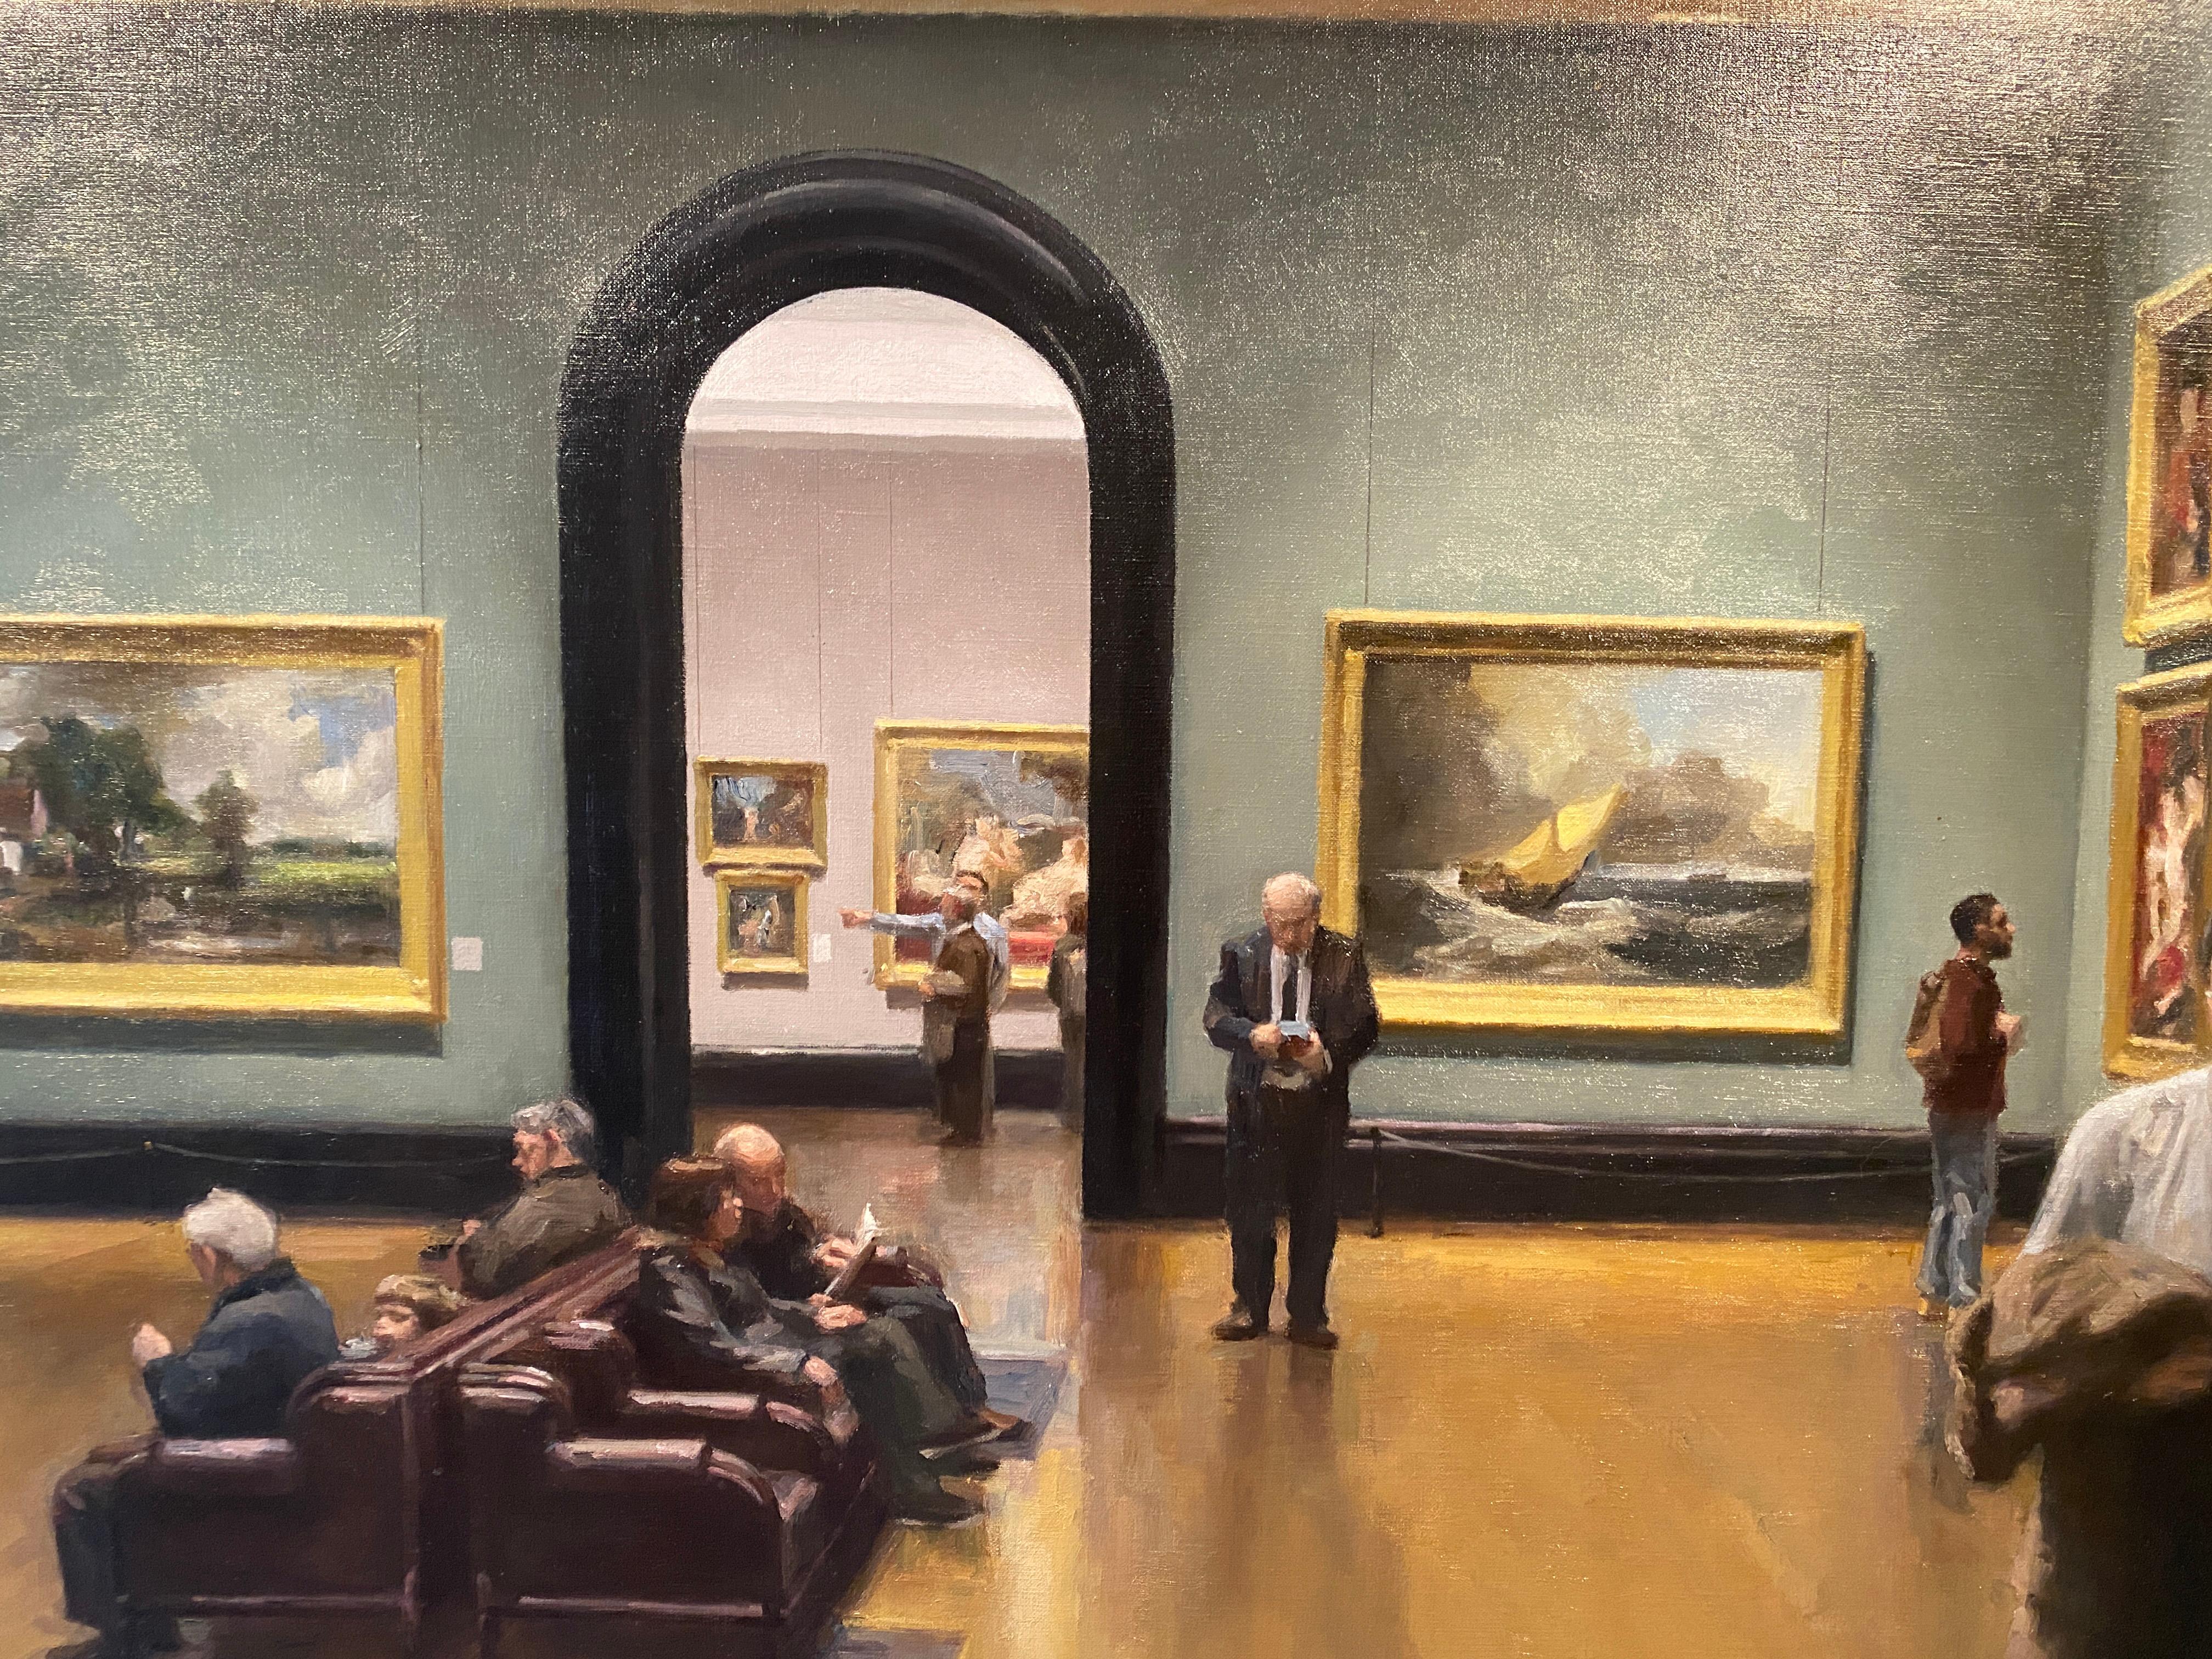 National Gallery, London - museum interior, London, paintings by Turner and more - American Realist Painting by Steven J. Levin